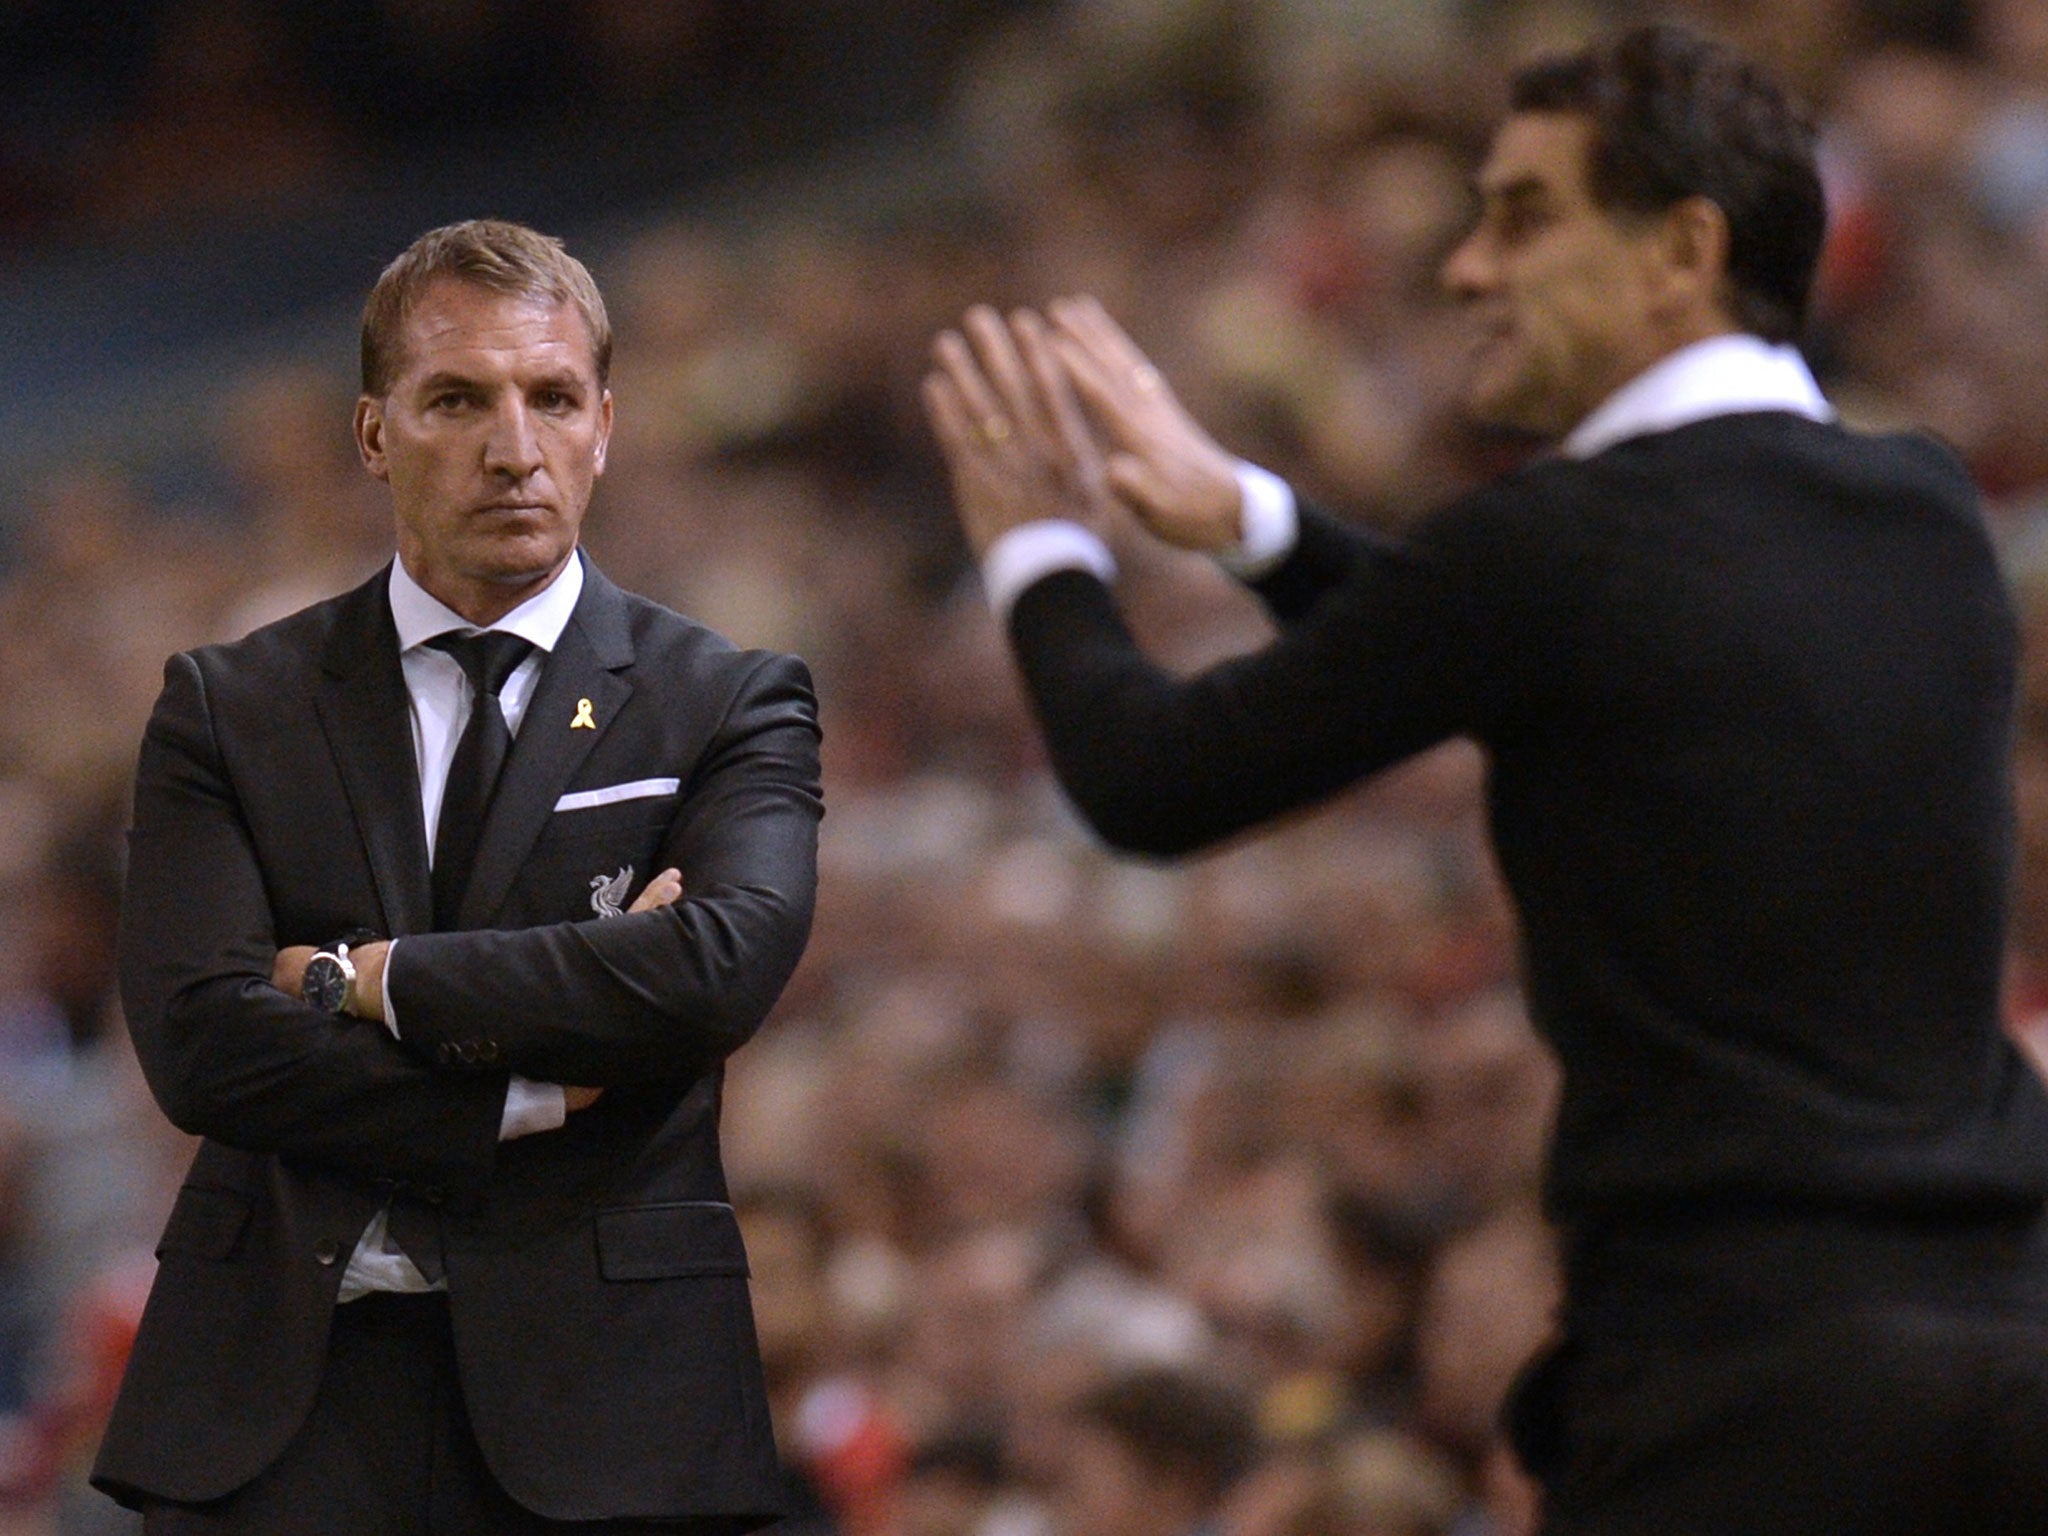 The 1-1 draw will do nothing to help the pressure on Brendan Rodgers